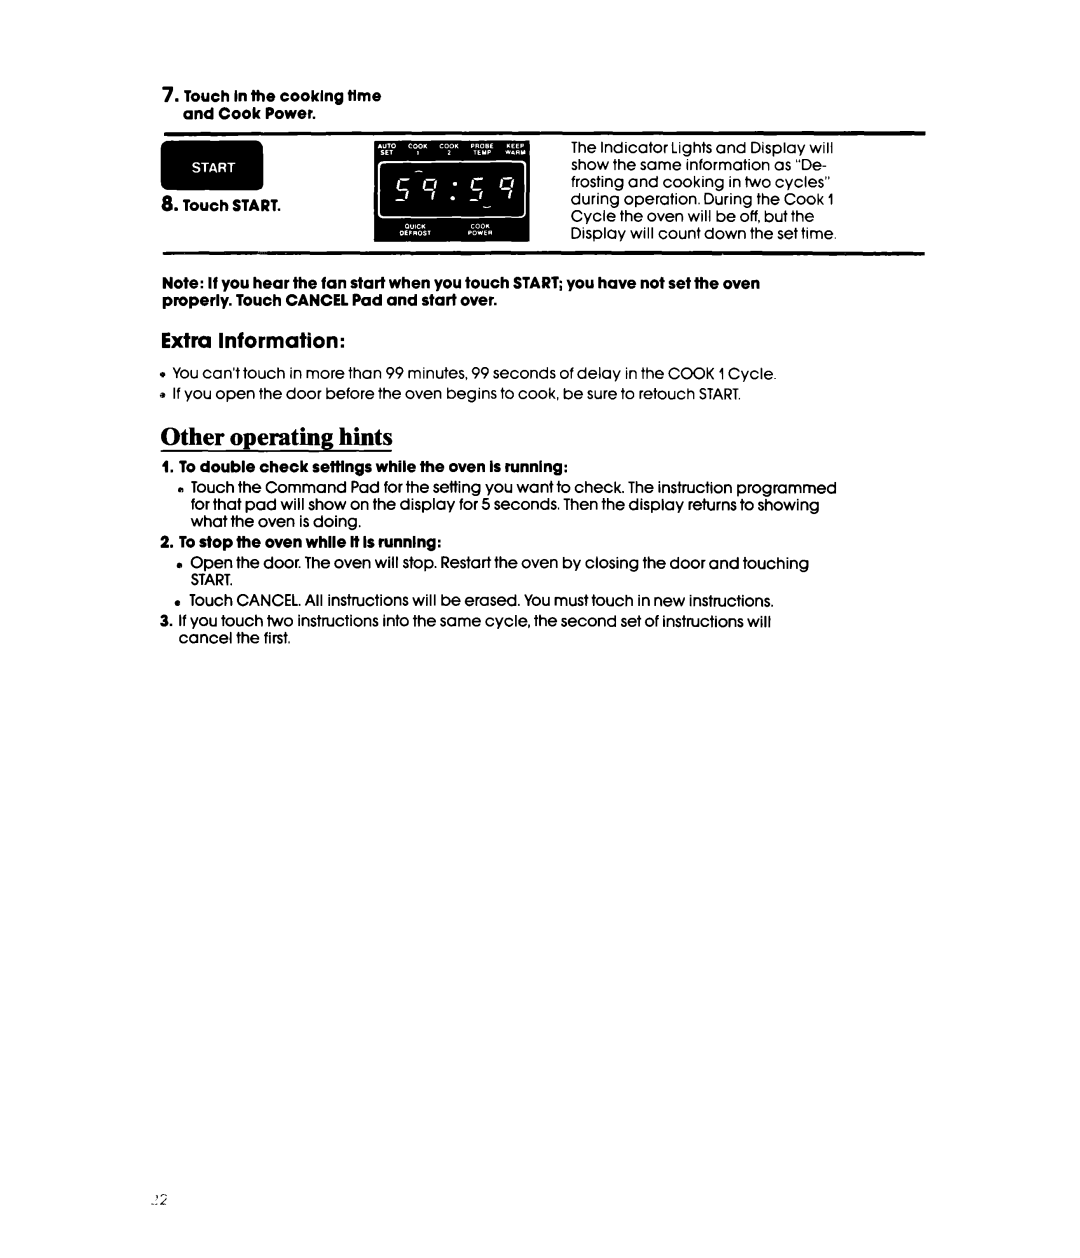 Whirlpool MW3601XW, MW3600XW manual Other operating hints, Extra Information 